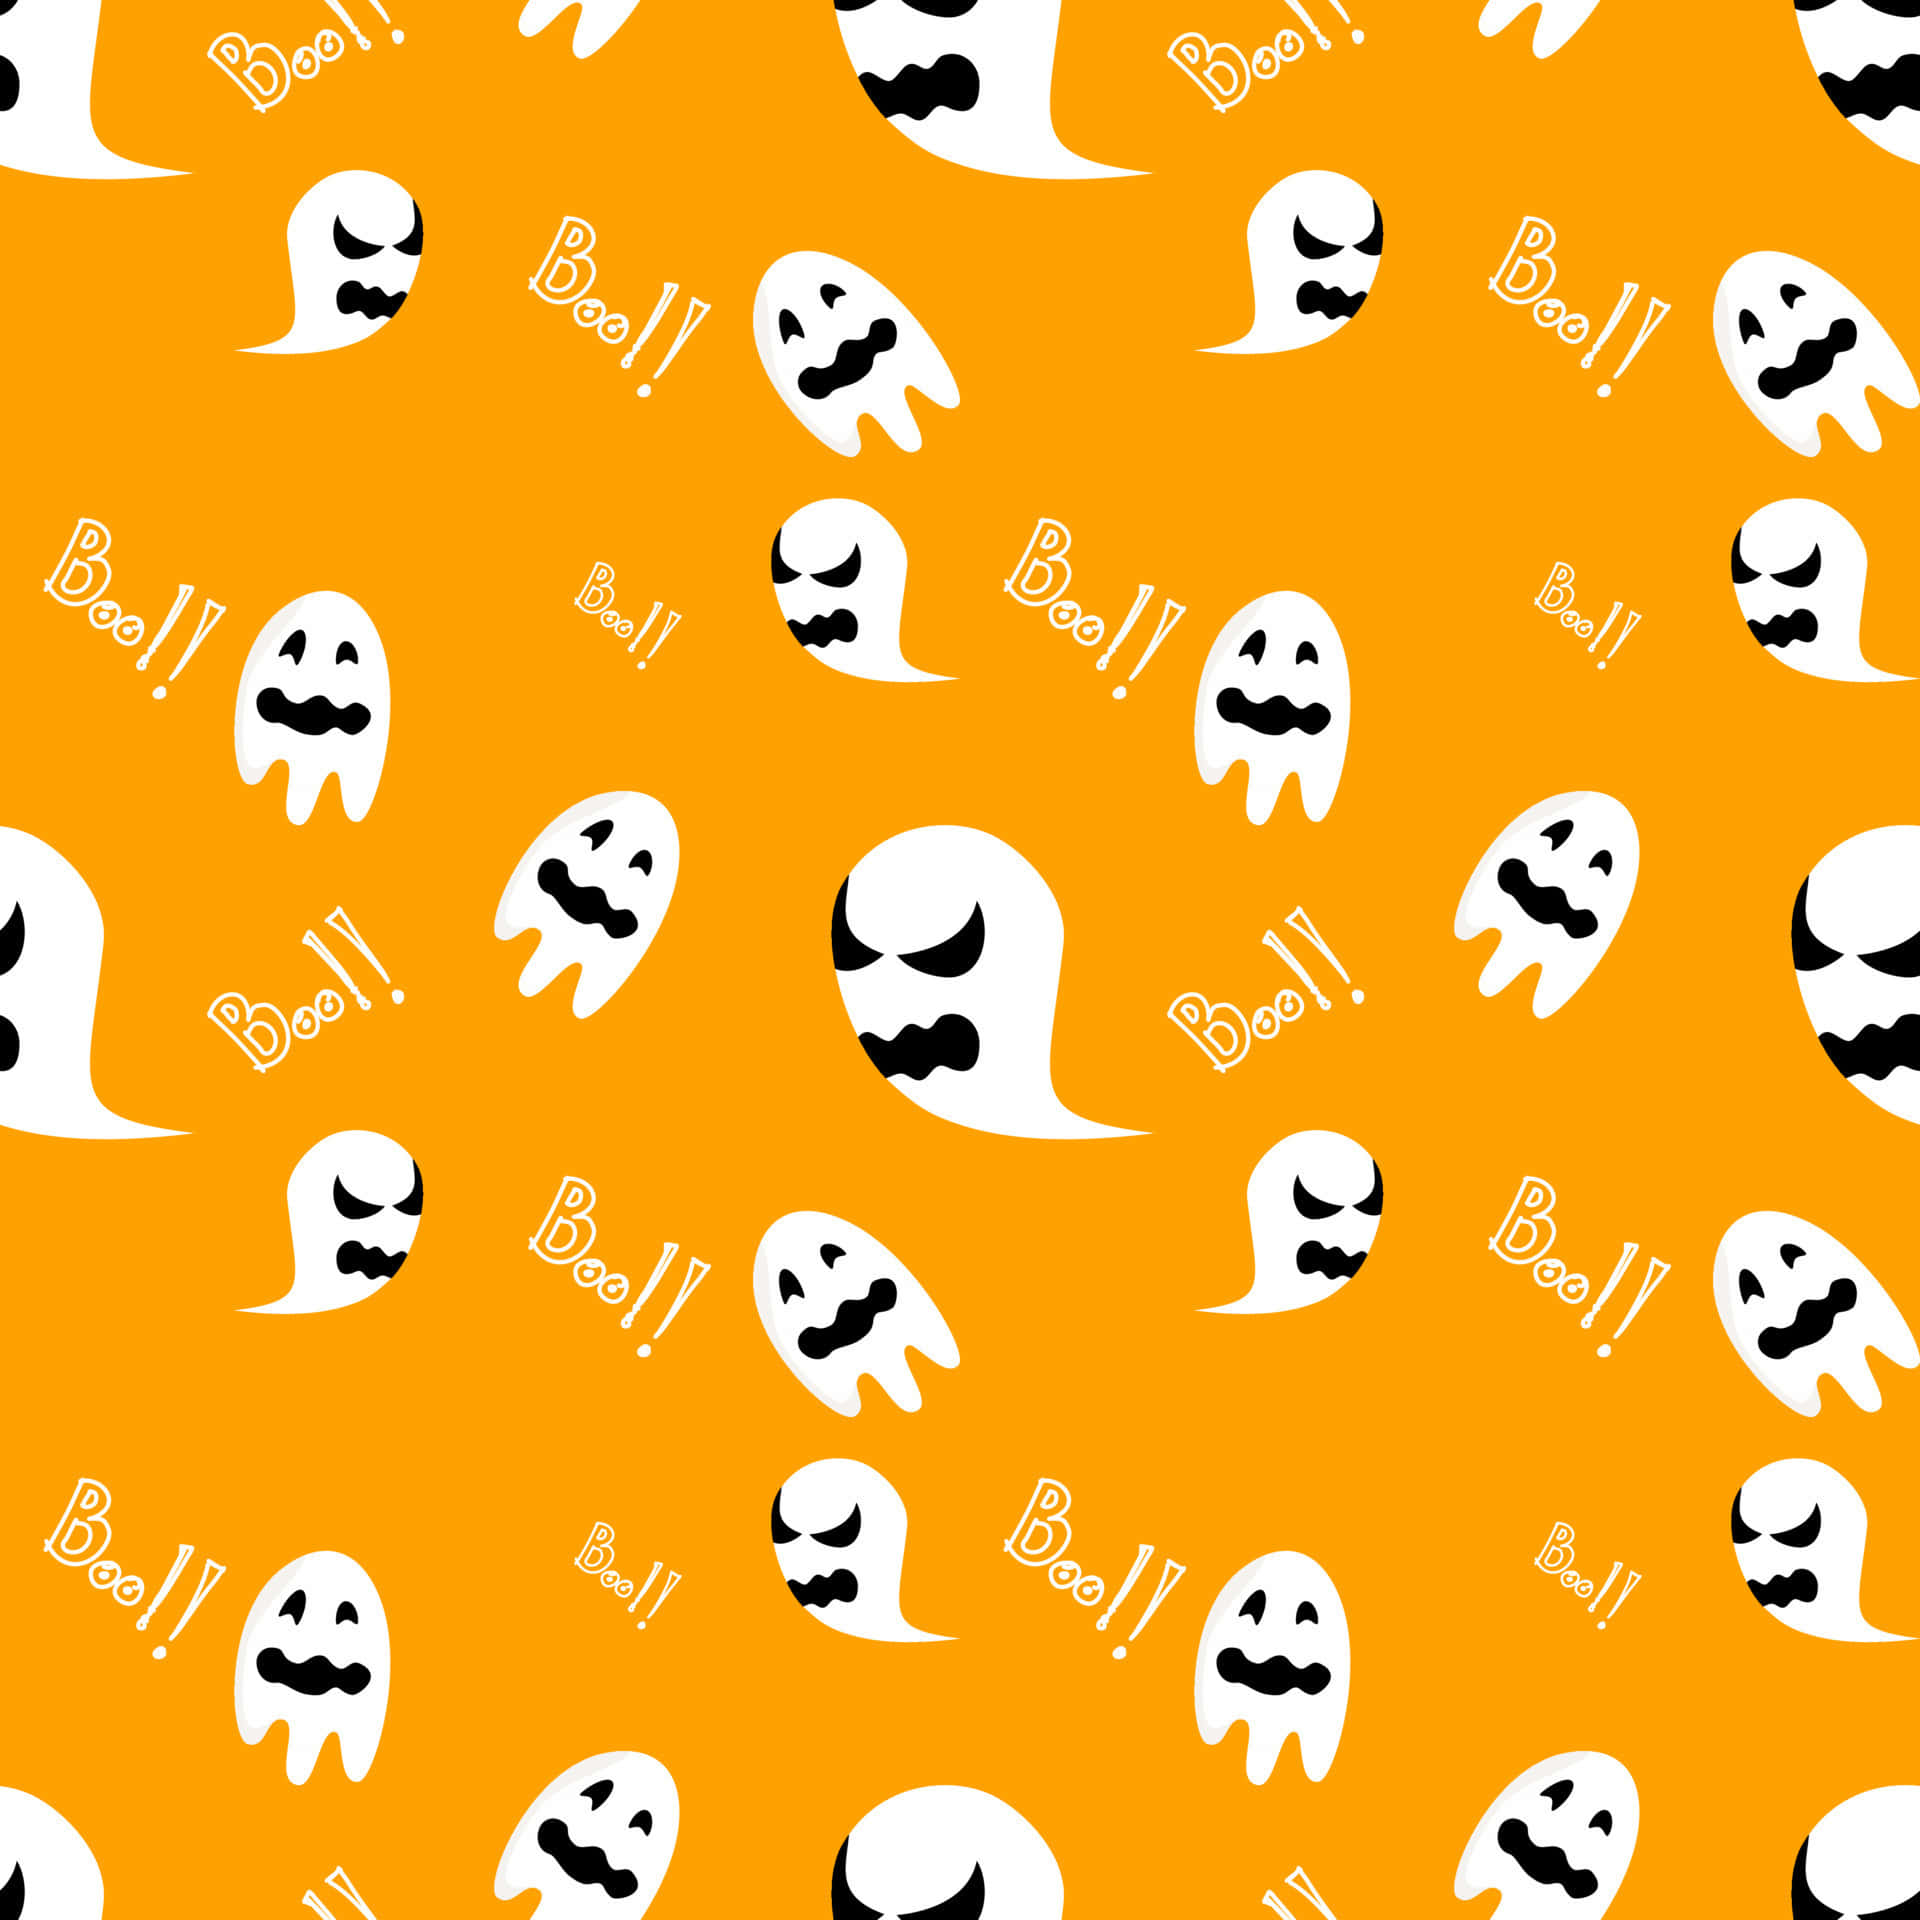 Say Hi To This Cute Little Ghost! Wallpaper